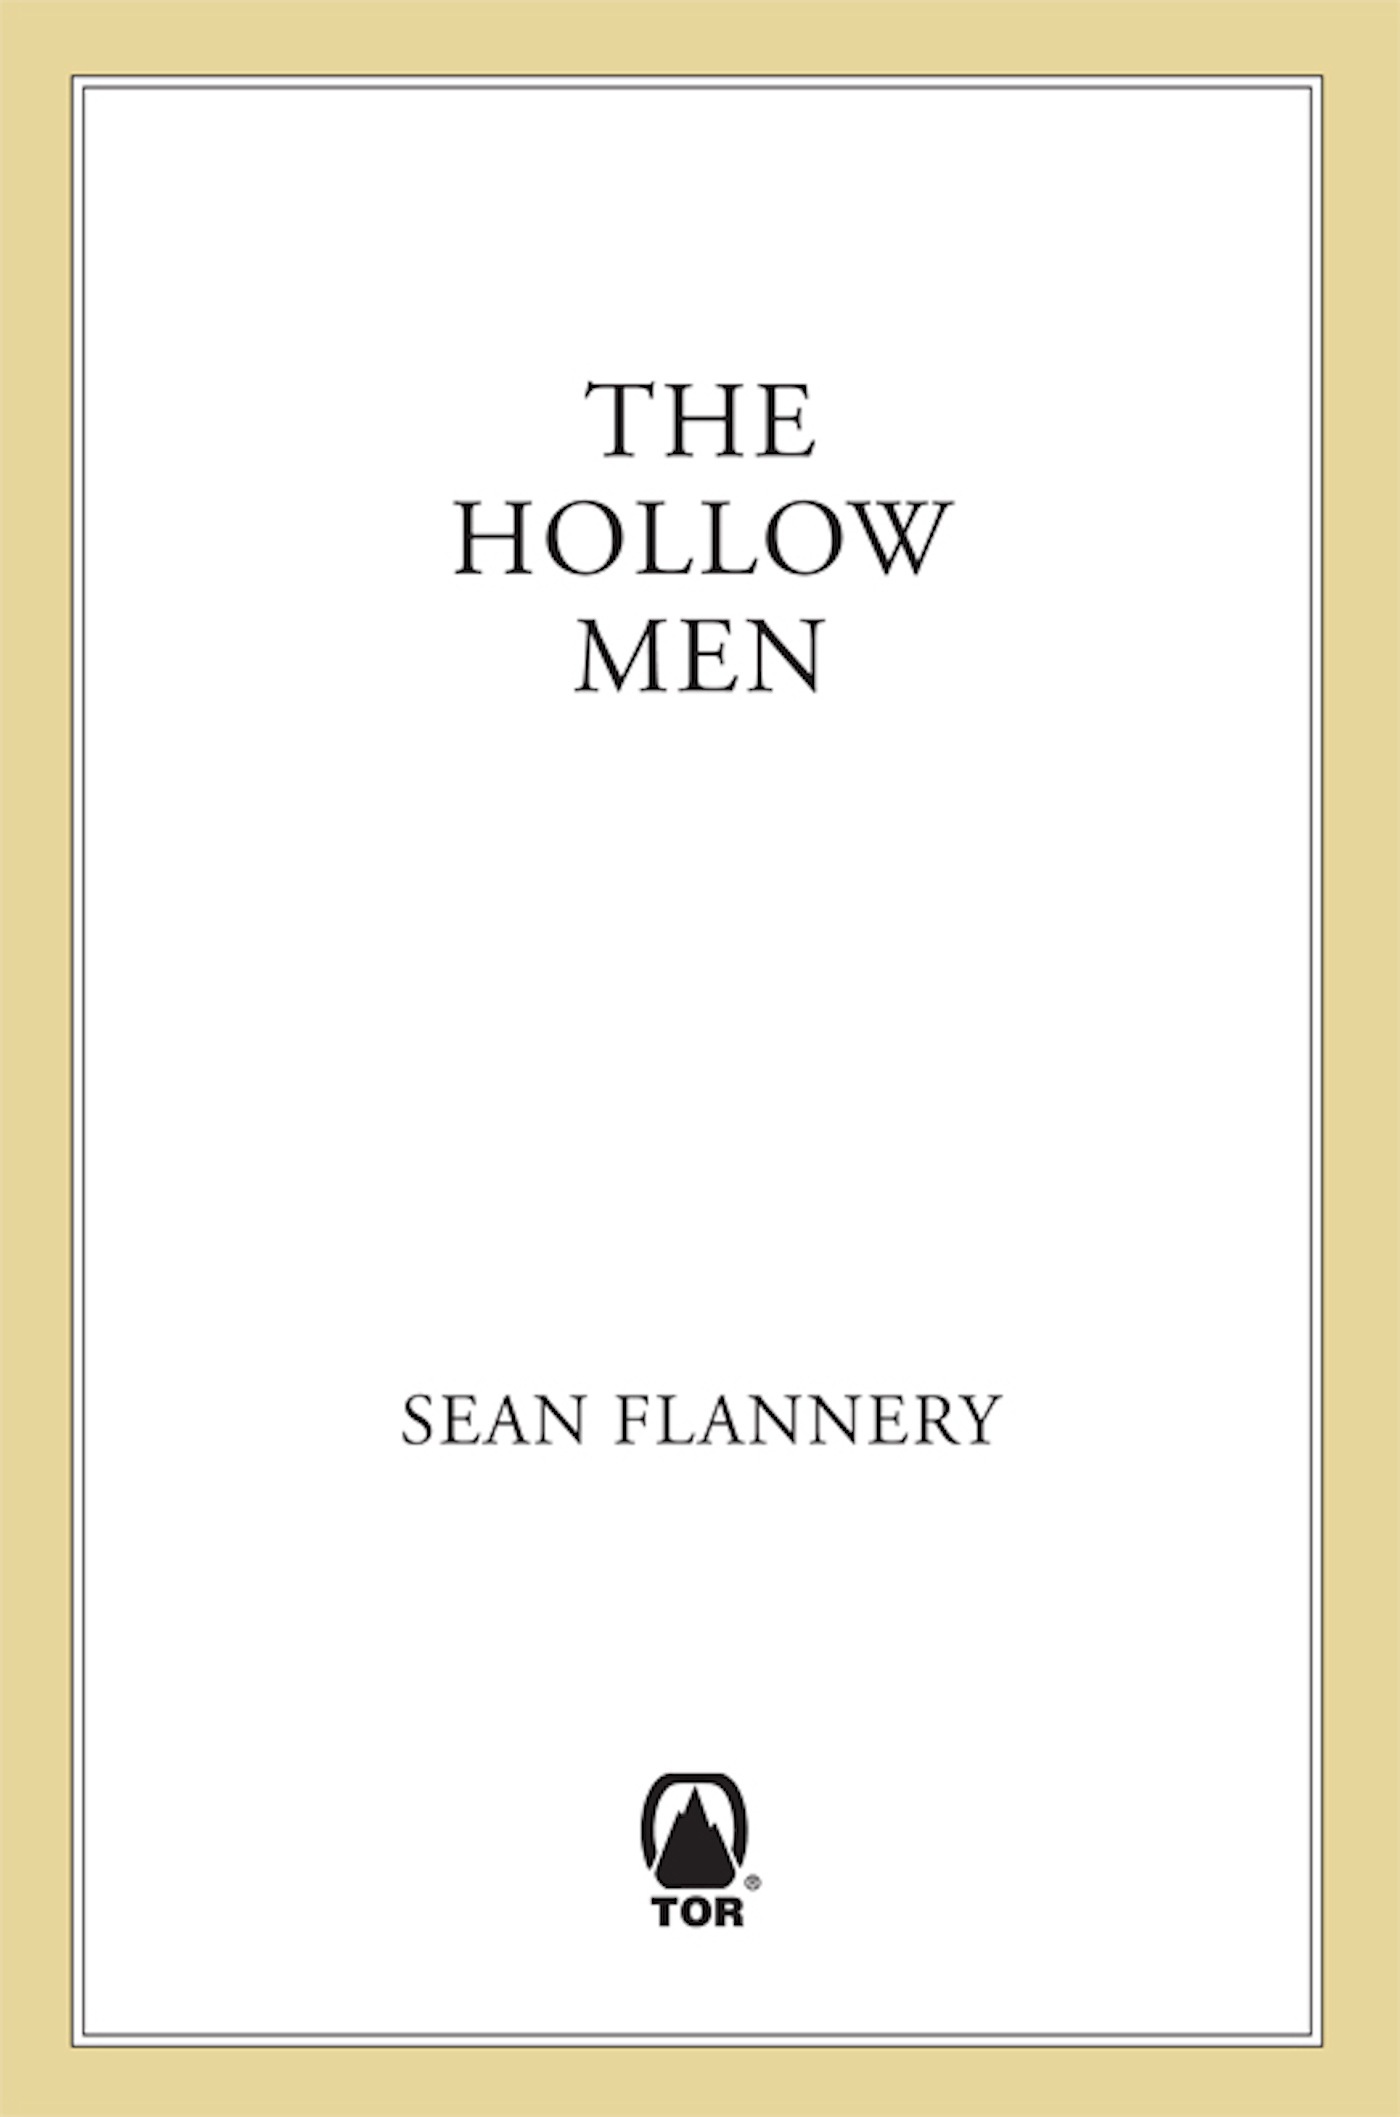 Hollow Men by Sean Flannery